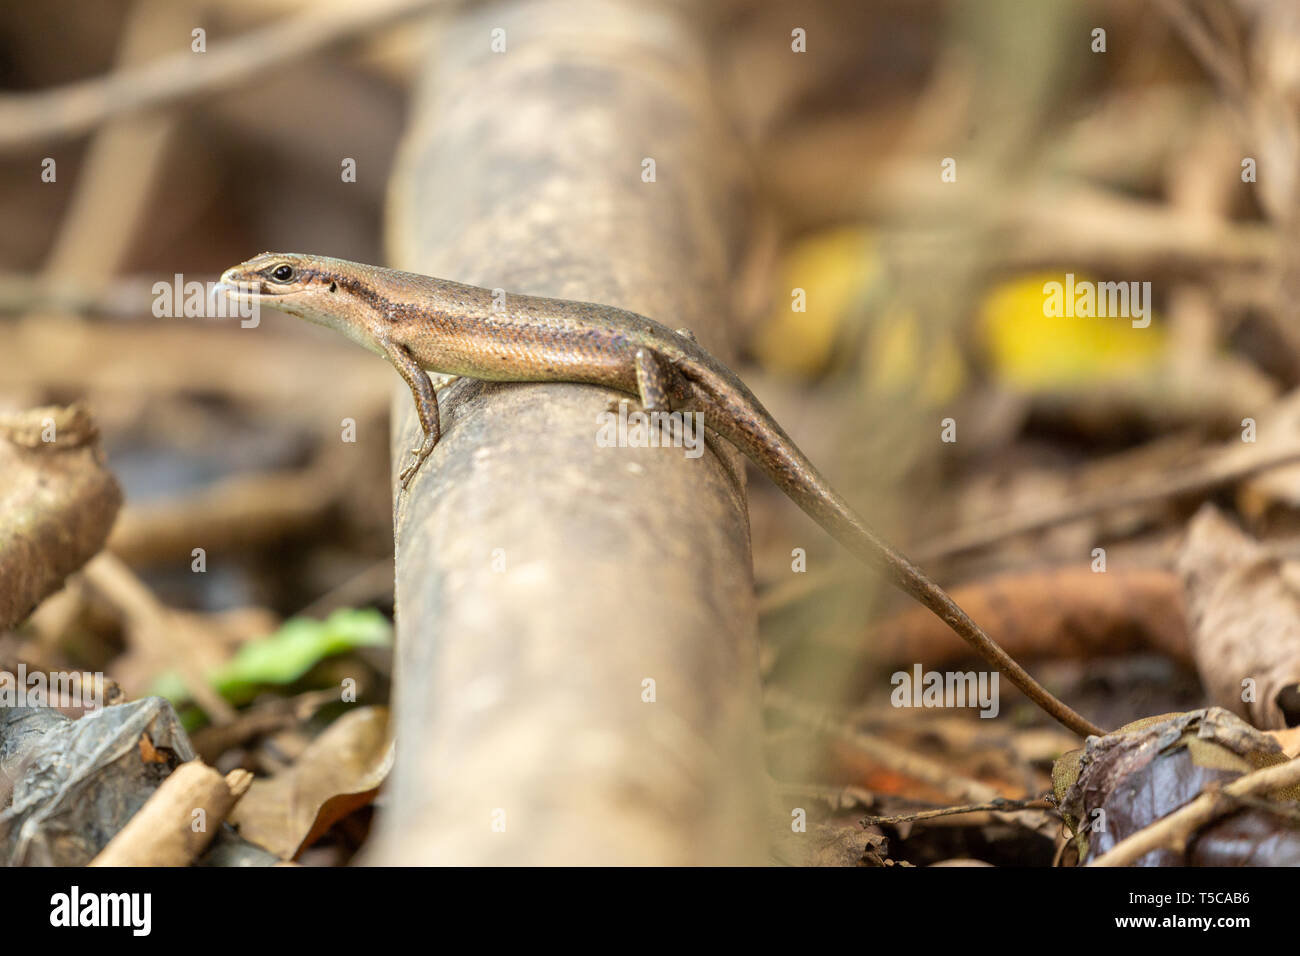 Lizard skink perched on a branch Stock Photo